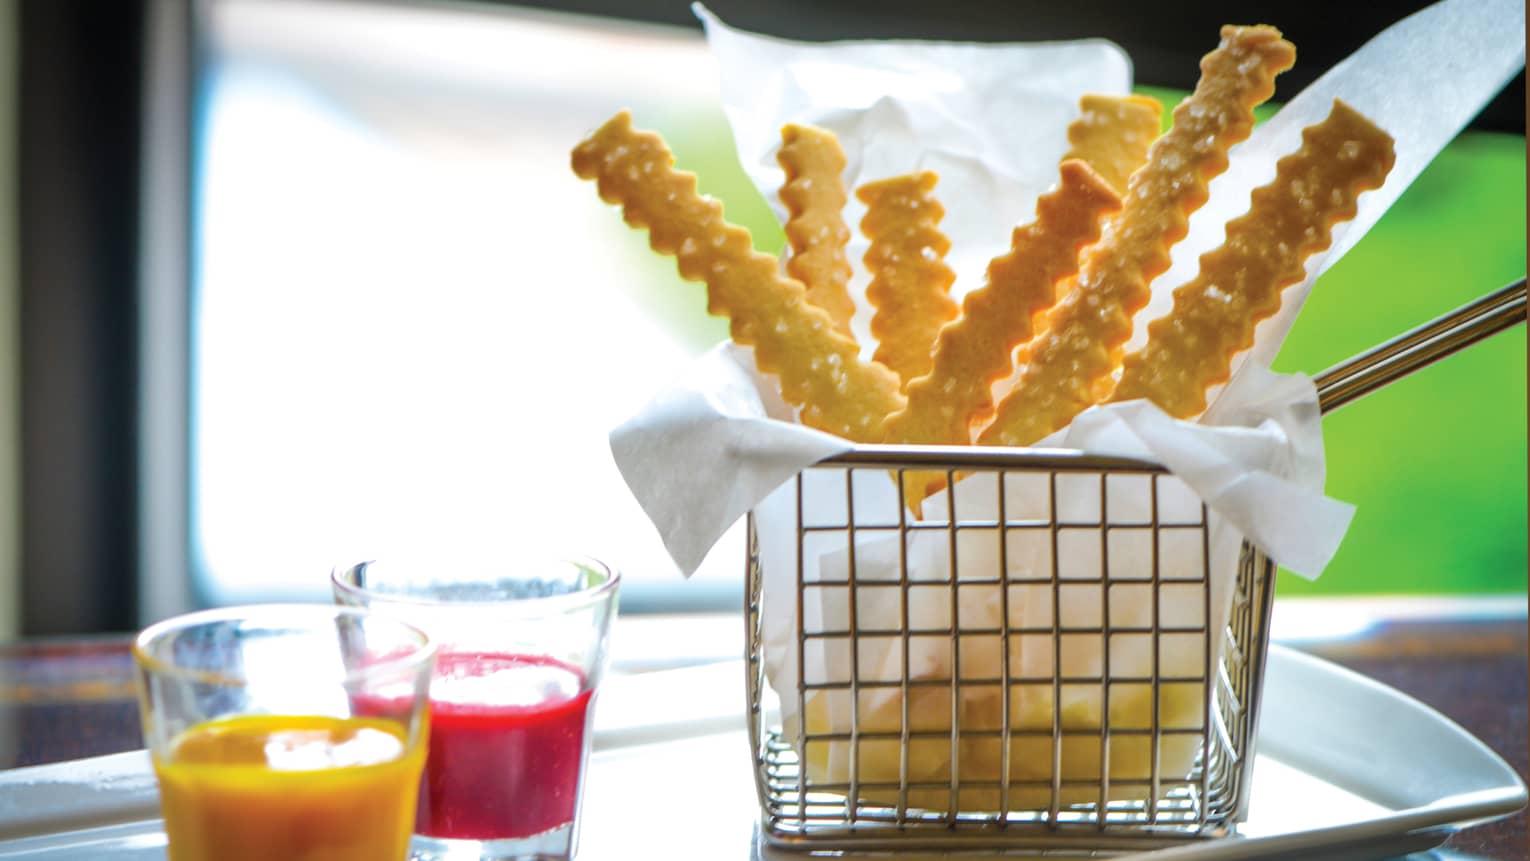 Basket of crinkly French fries on a silver tray with ketchup and mustard dipping cups